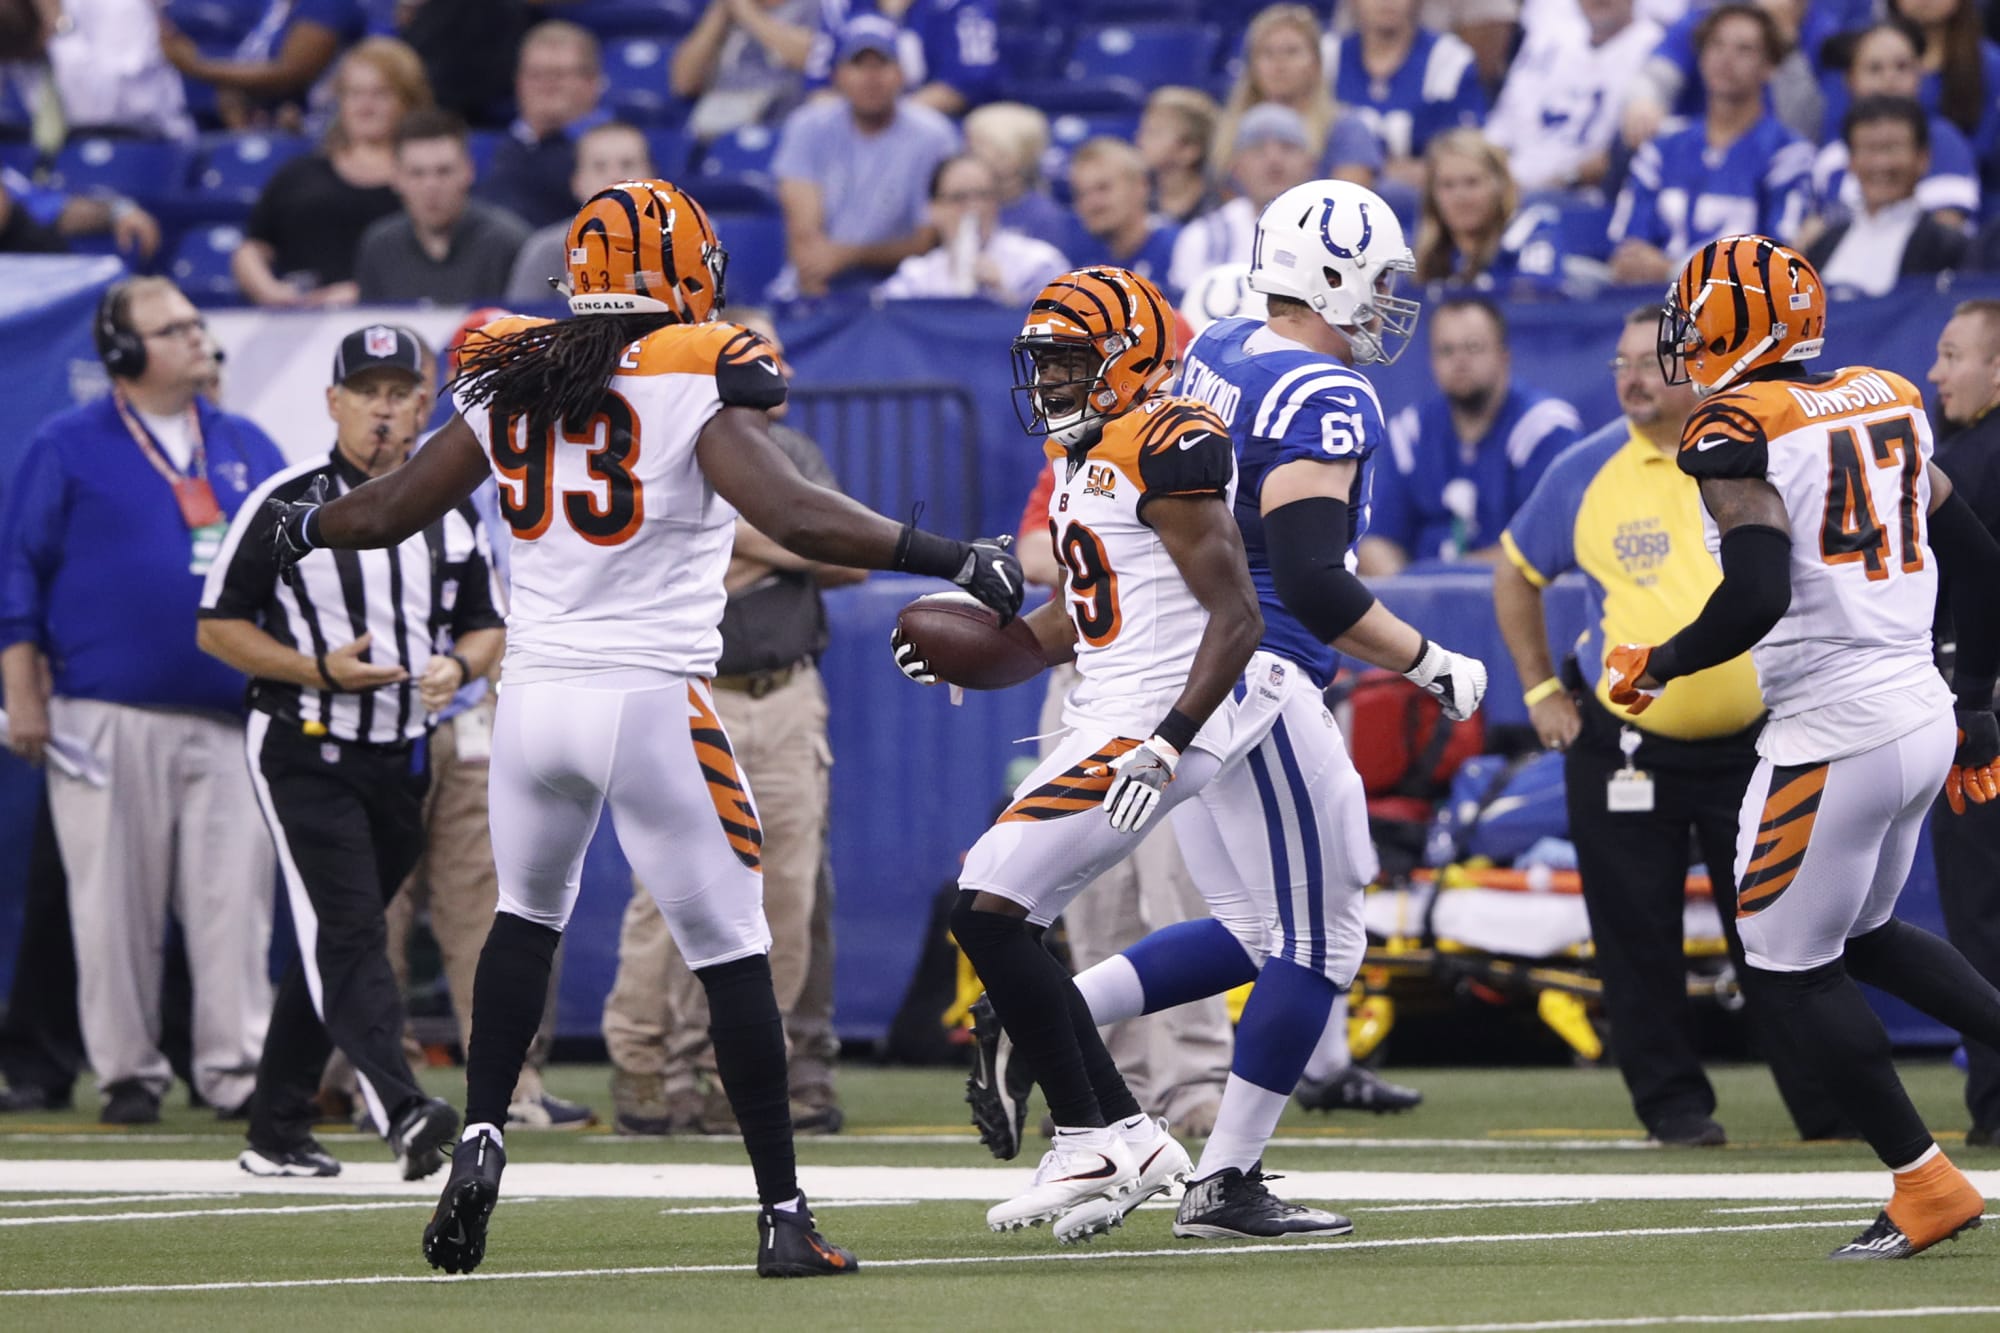 Bengals vs Colts Defense carries first half action in Week 4